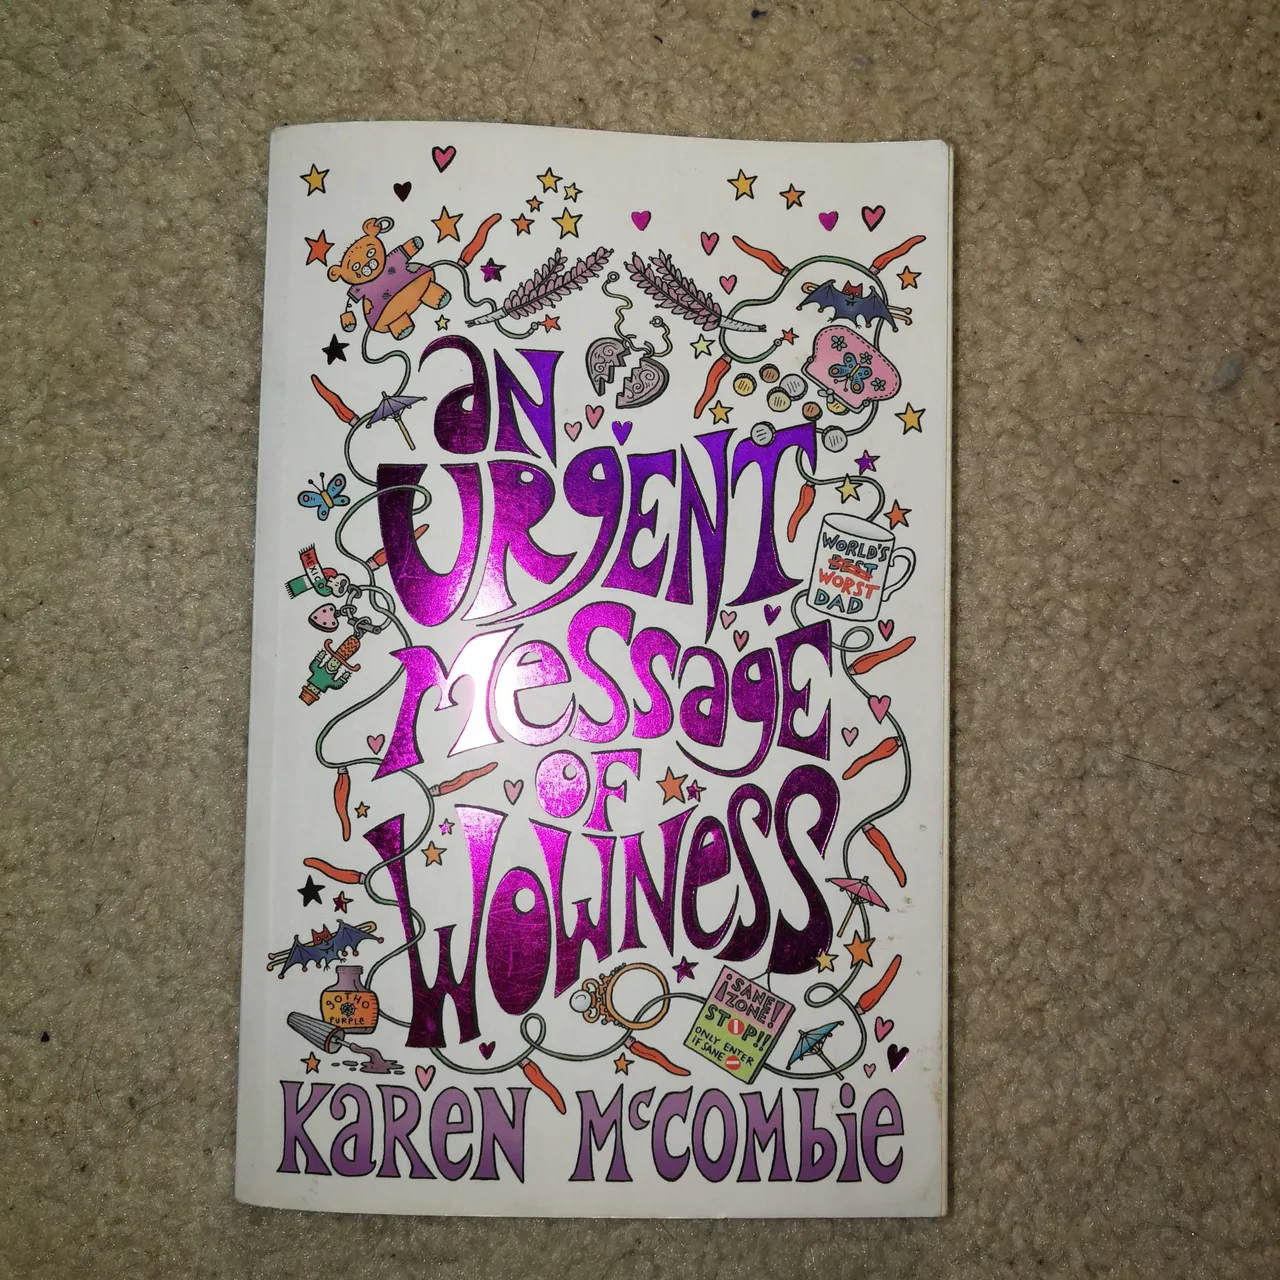 *FREE An Urgent Message of Wowness by Karen McCombie photo 3